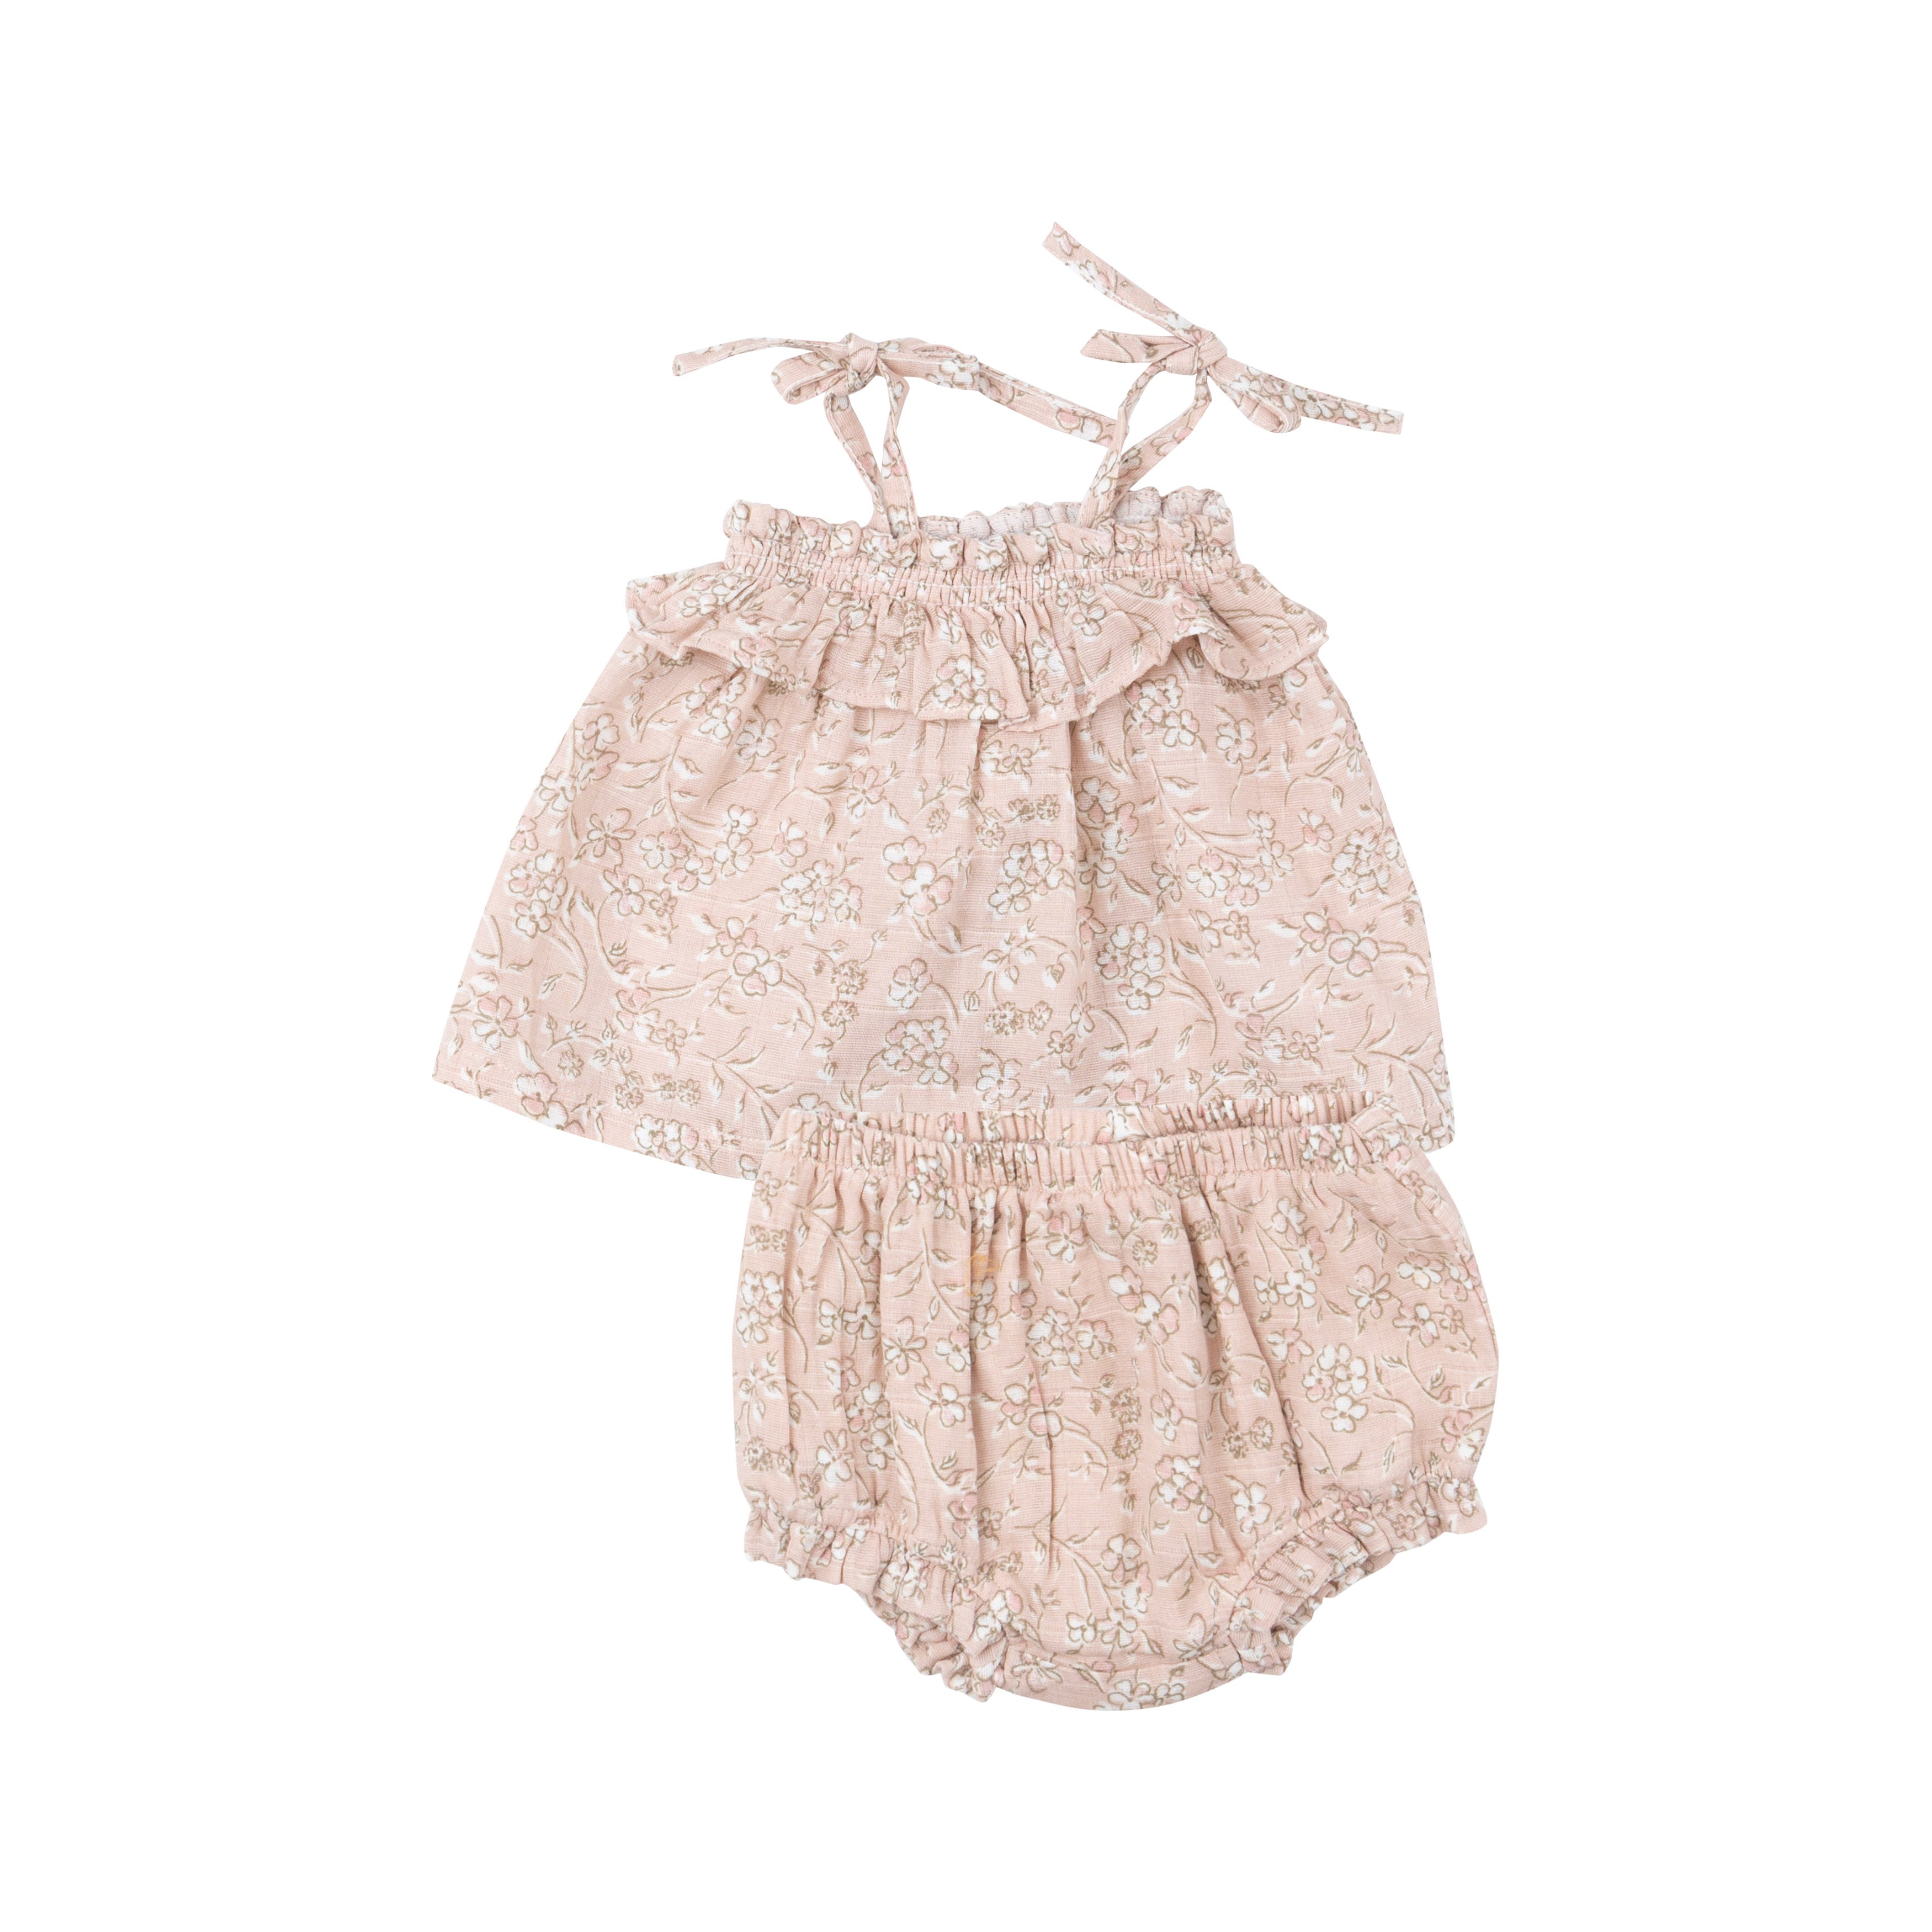 Ruffle Top & Bloomer - Baby'S Breath Floral